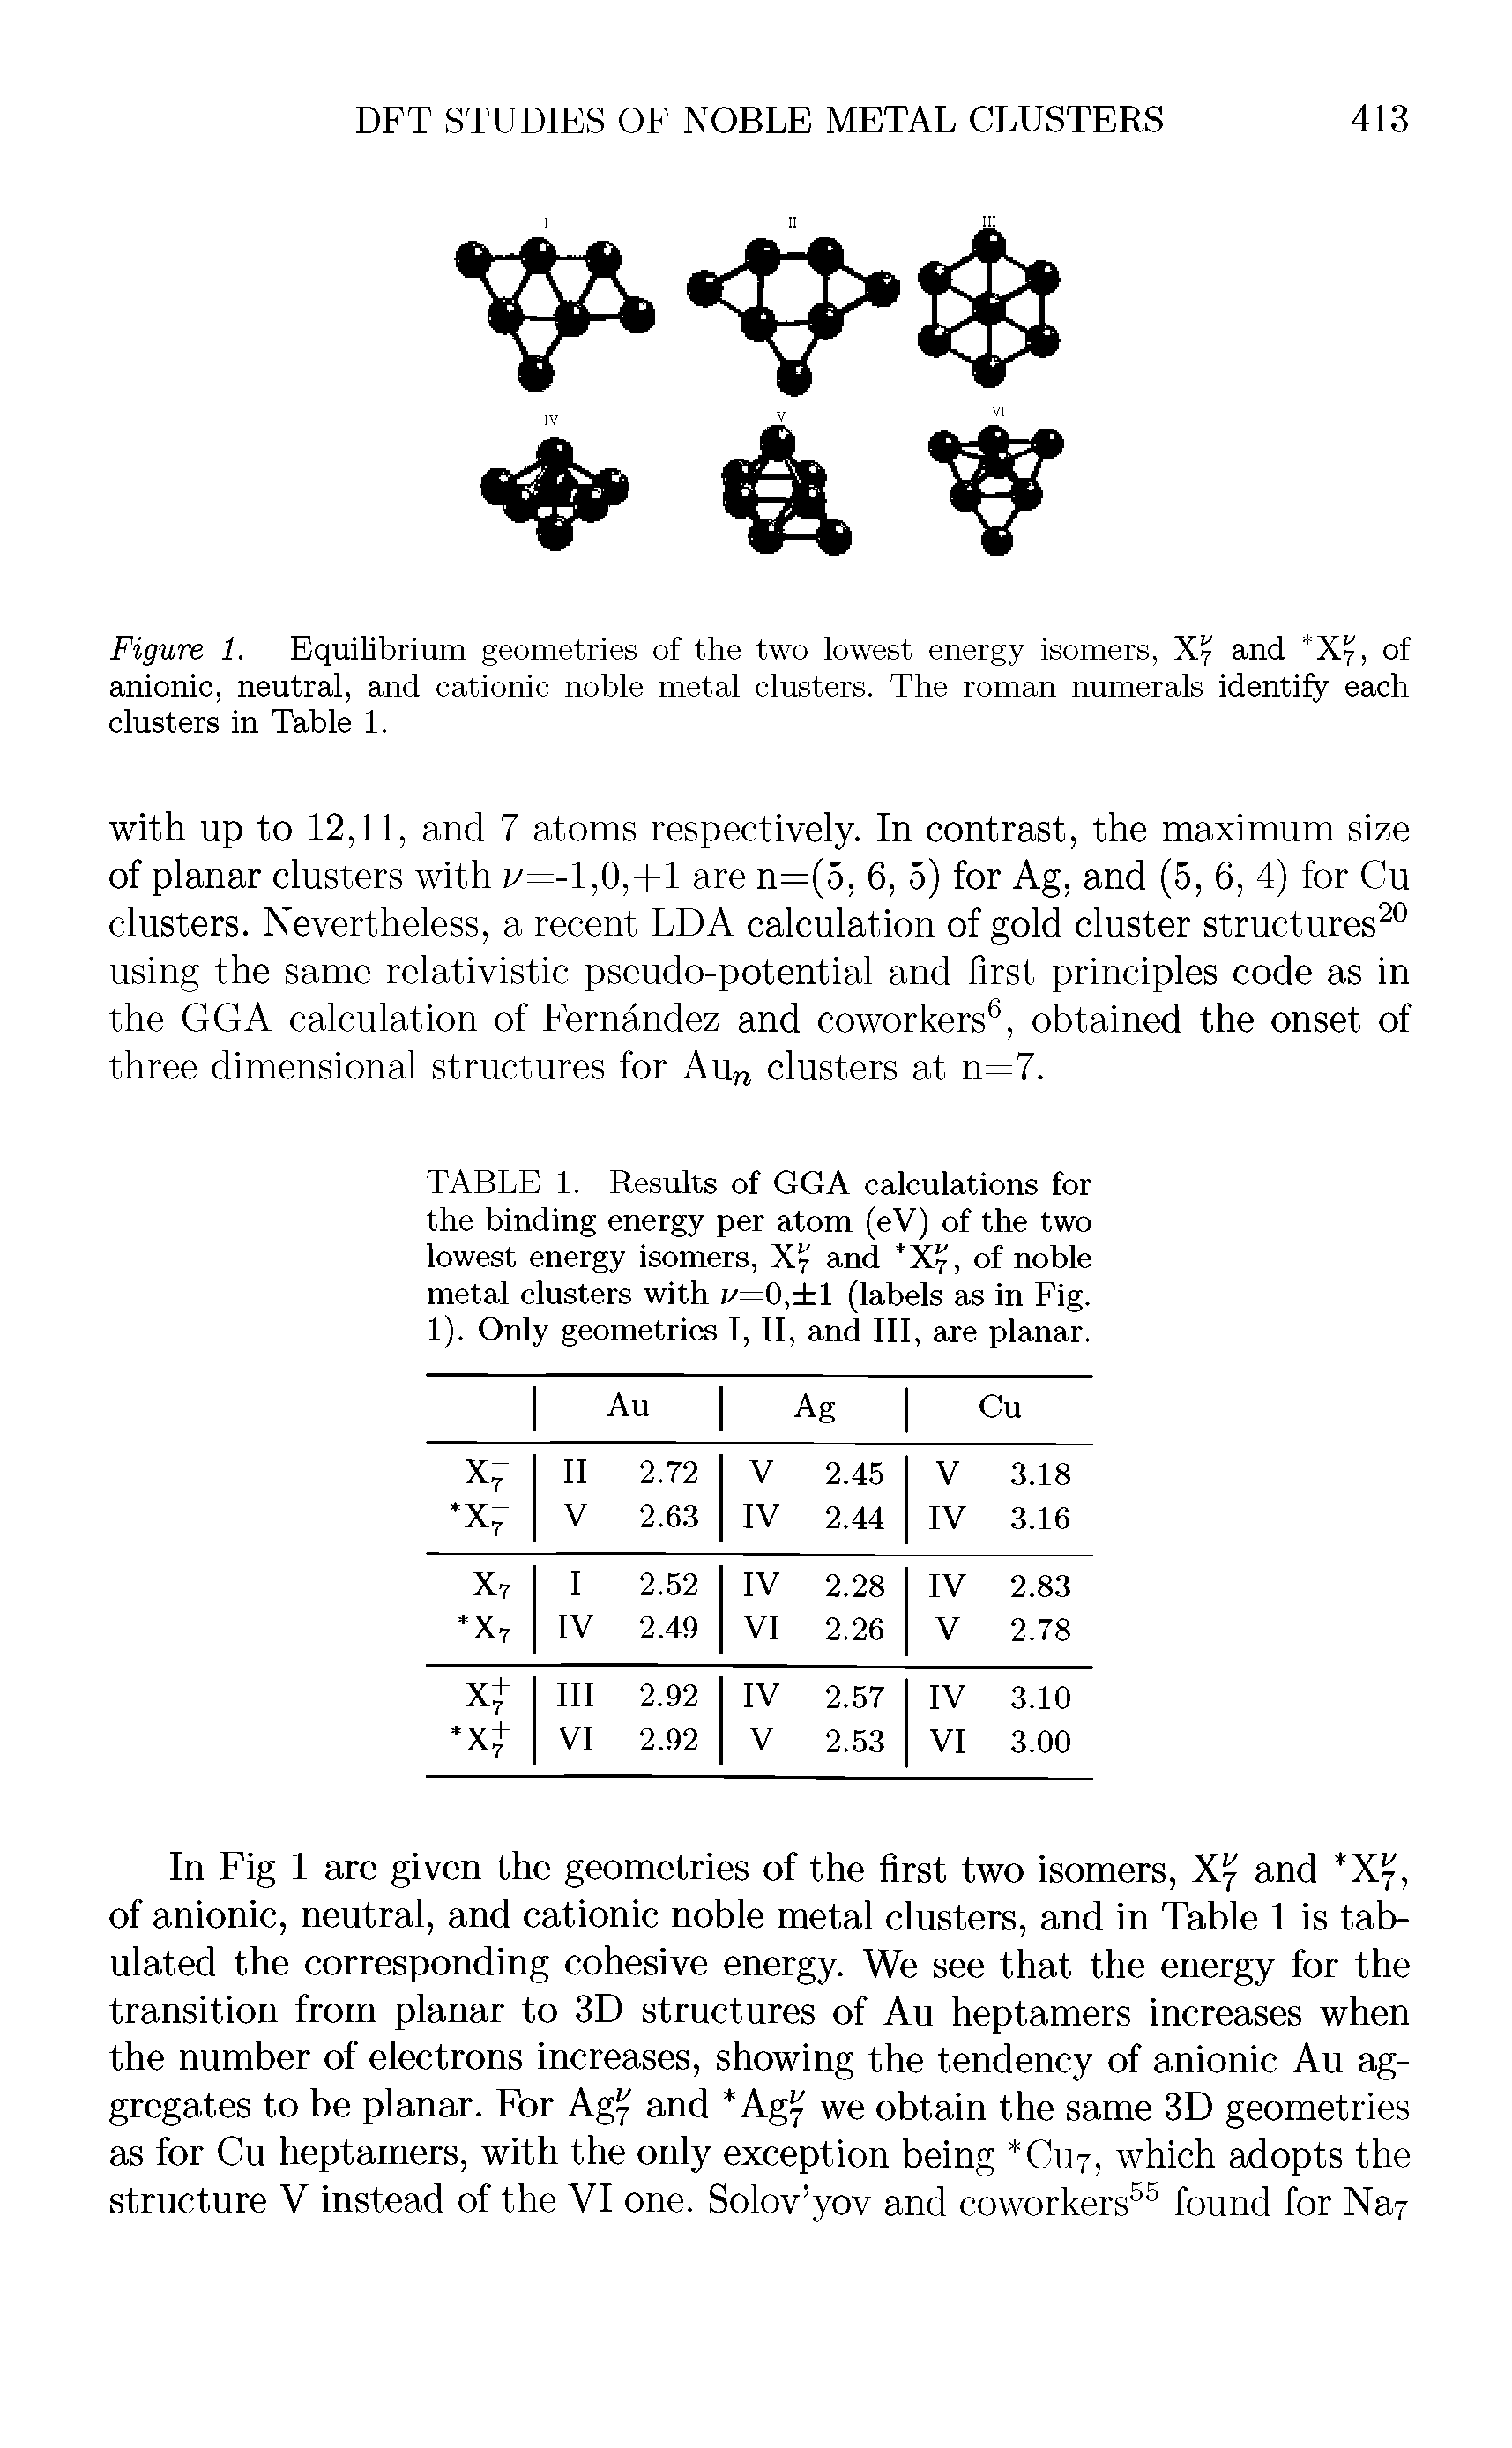 Figure 1. Equilibrium geometries of the two lowest energy isomers, Xy and Xy, of anionic, neutral, and cationic noble metal clusters. The roman numerals identify each clusters in Table 1.